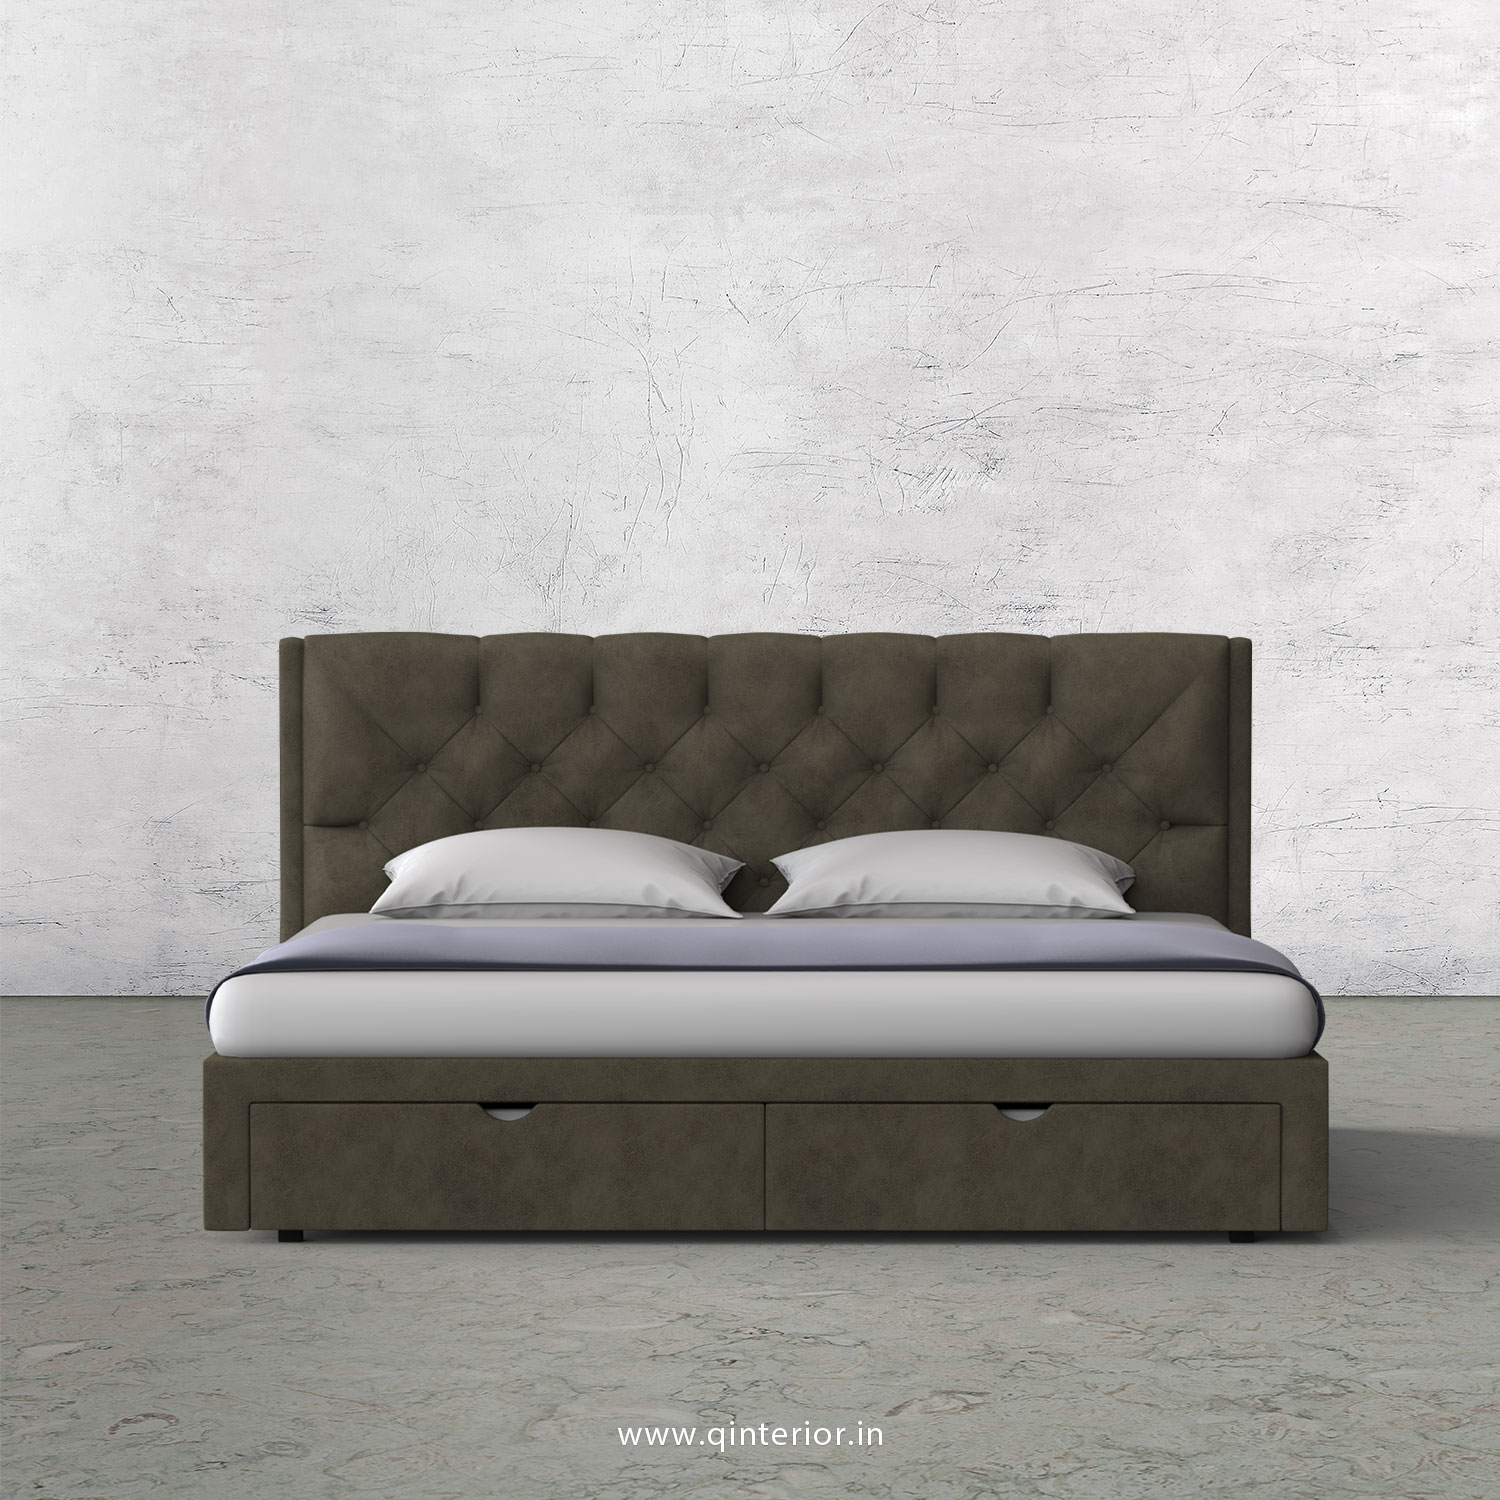 Scorpius Queen Storage Bed in Fab Leather Fabric - QBD001 FL03